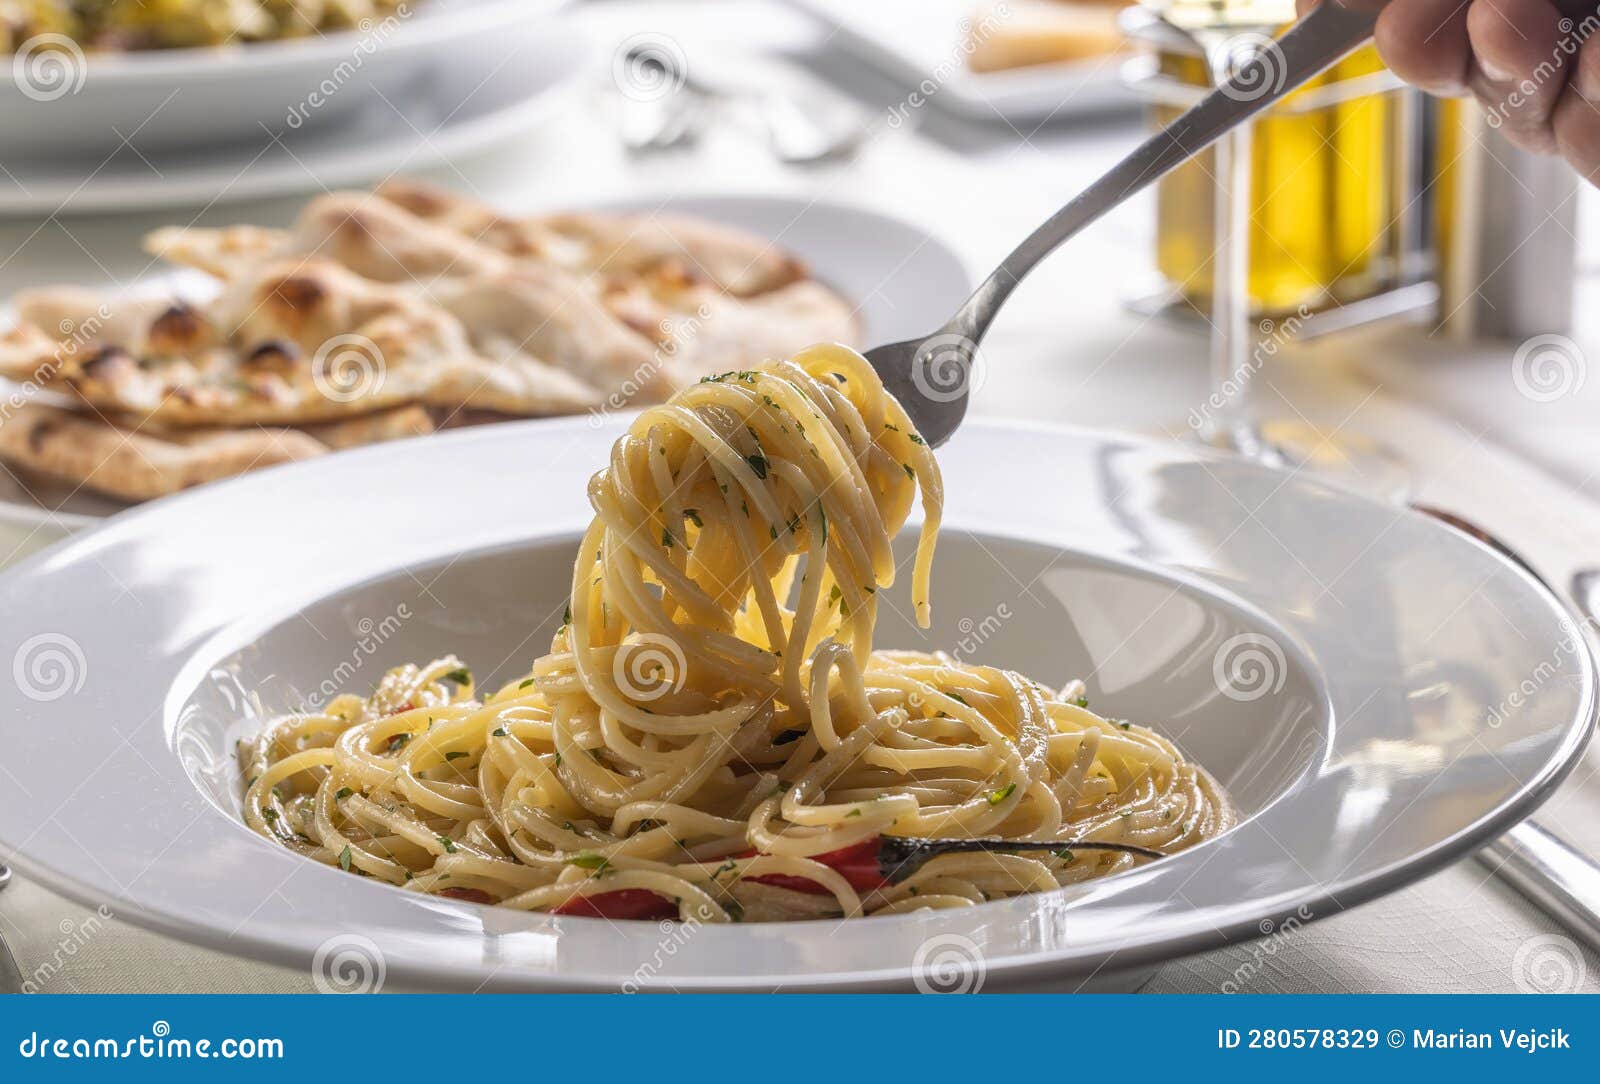 hand with a fork spinning spaghetti aglio e olio peperoncino from a plate in a restaurant